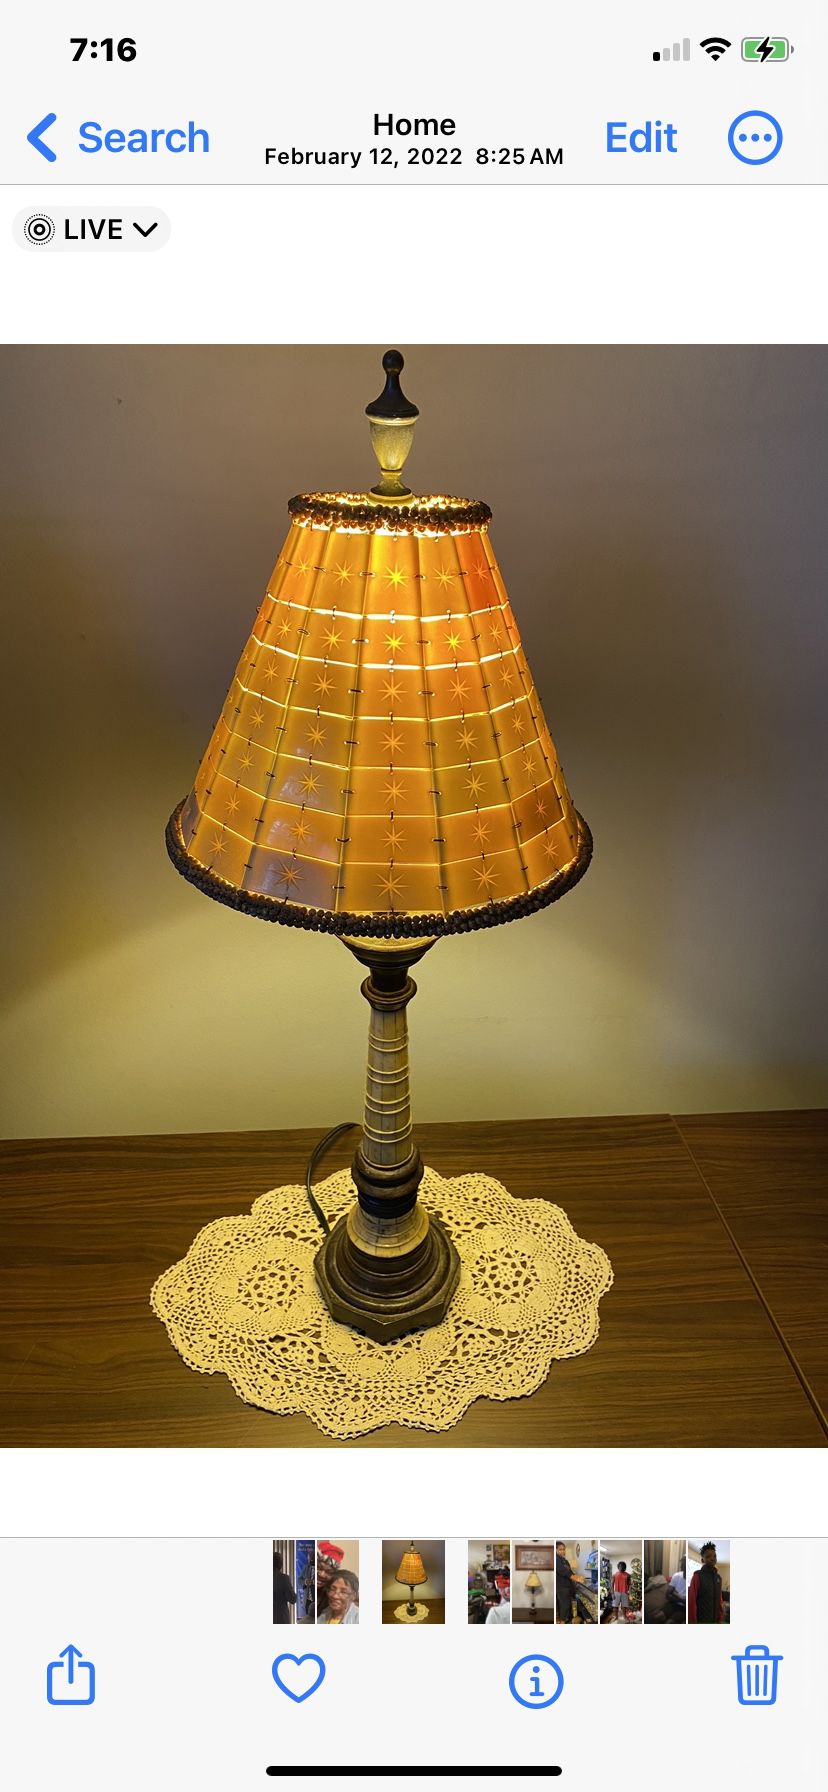 Antique Shell Lamp